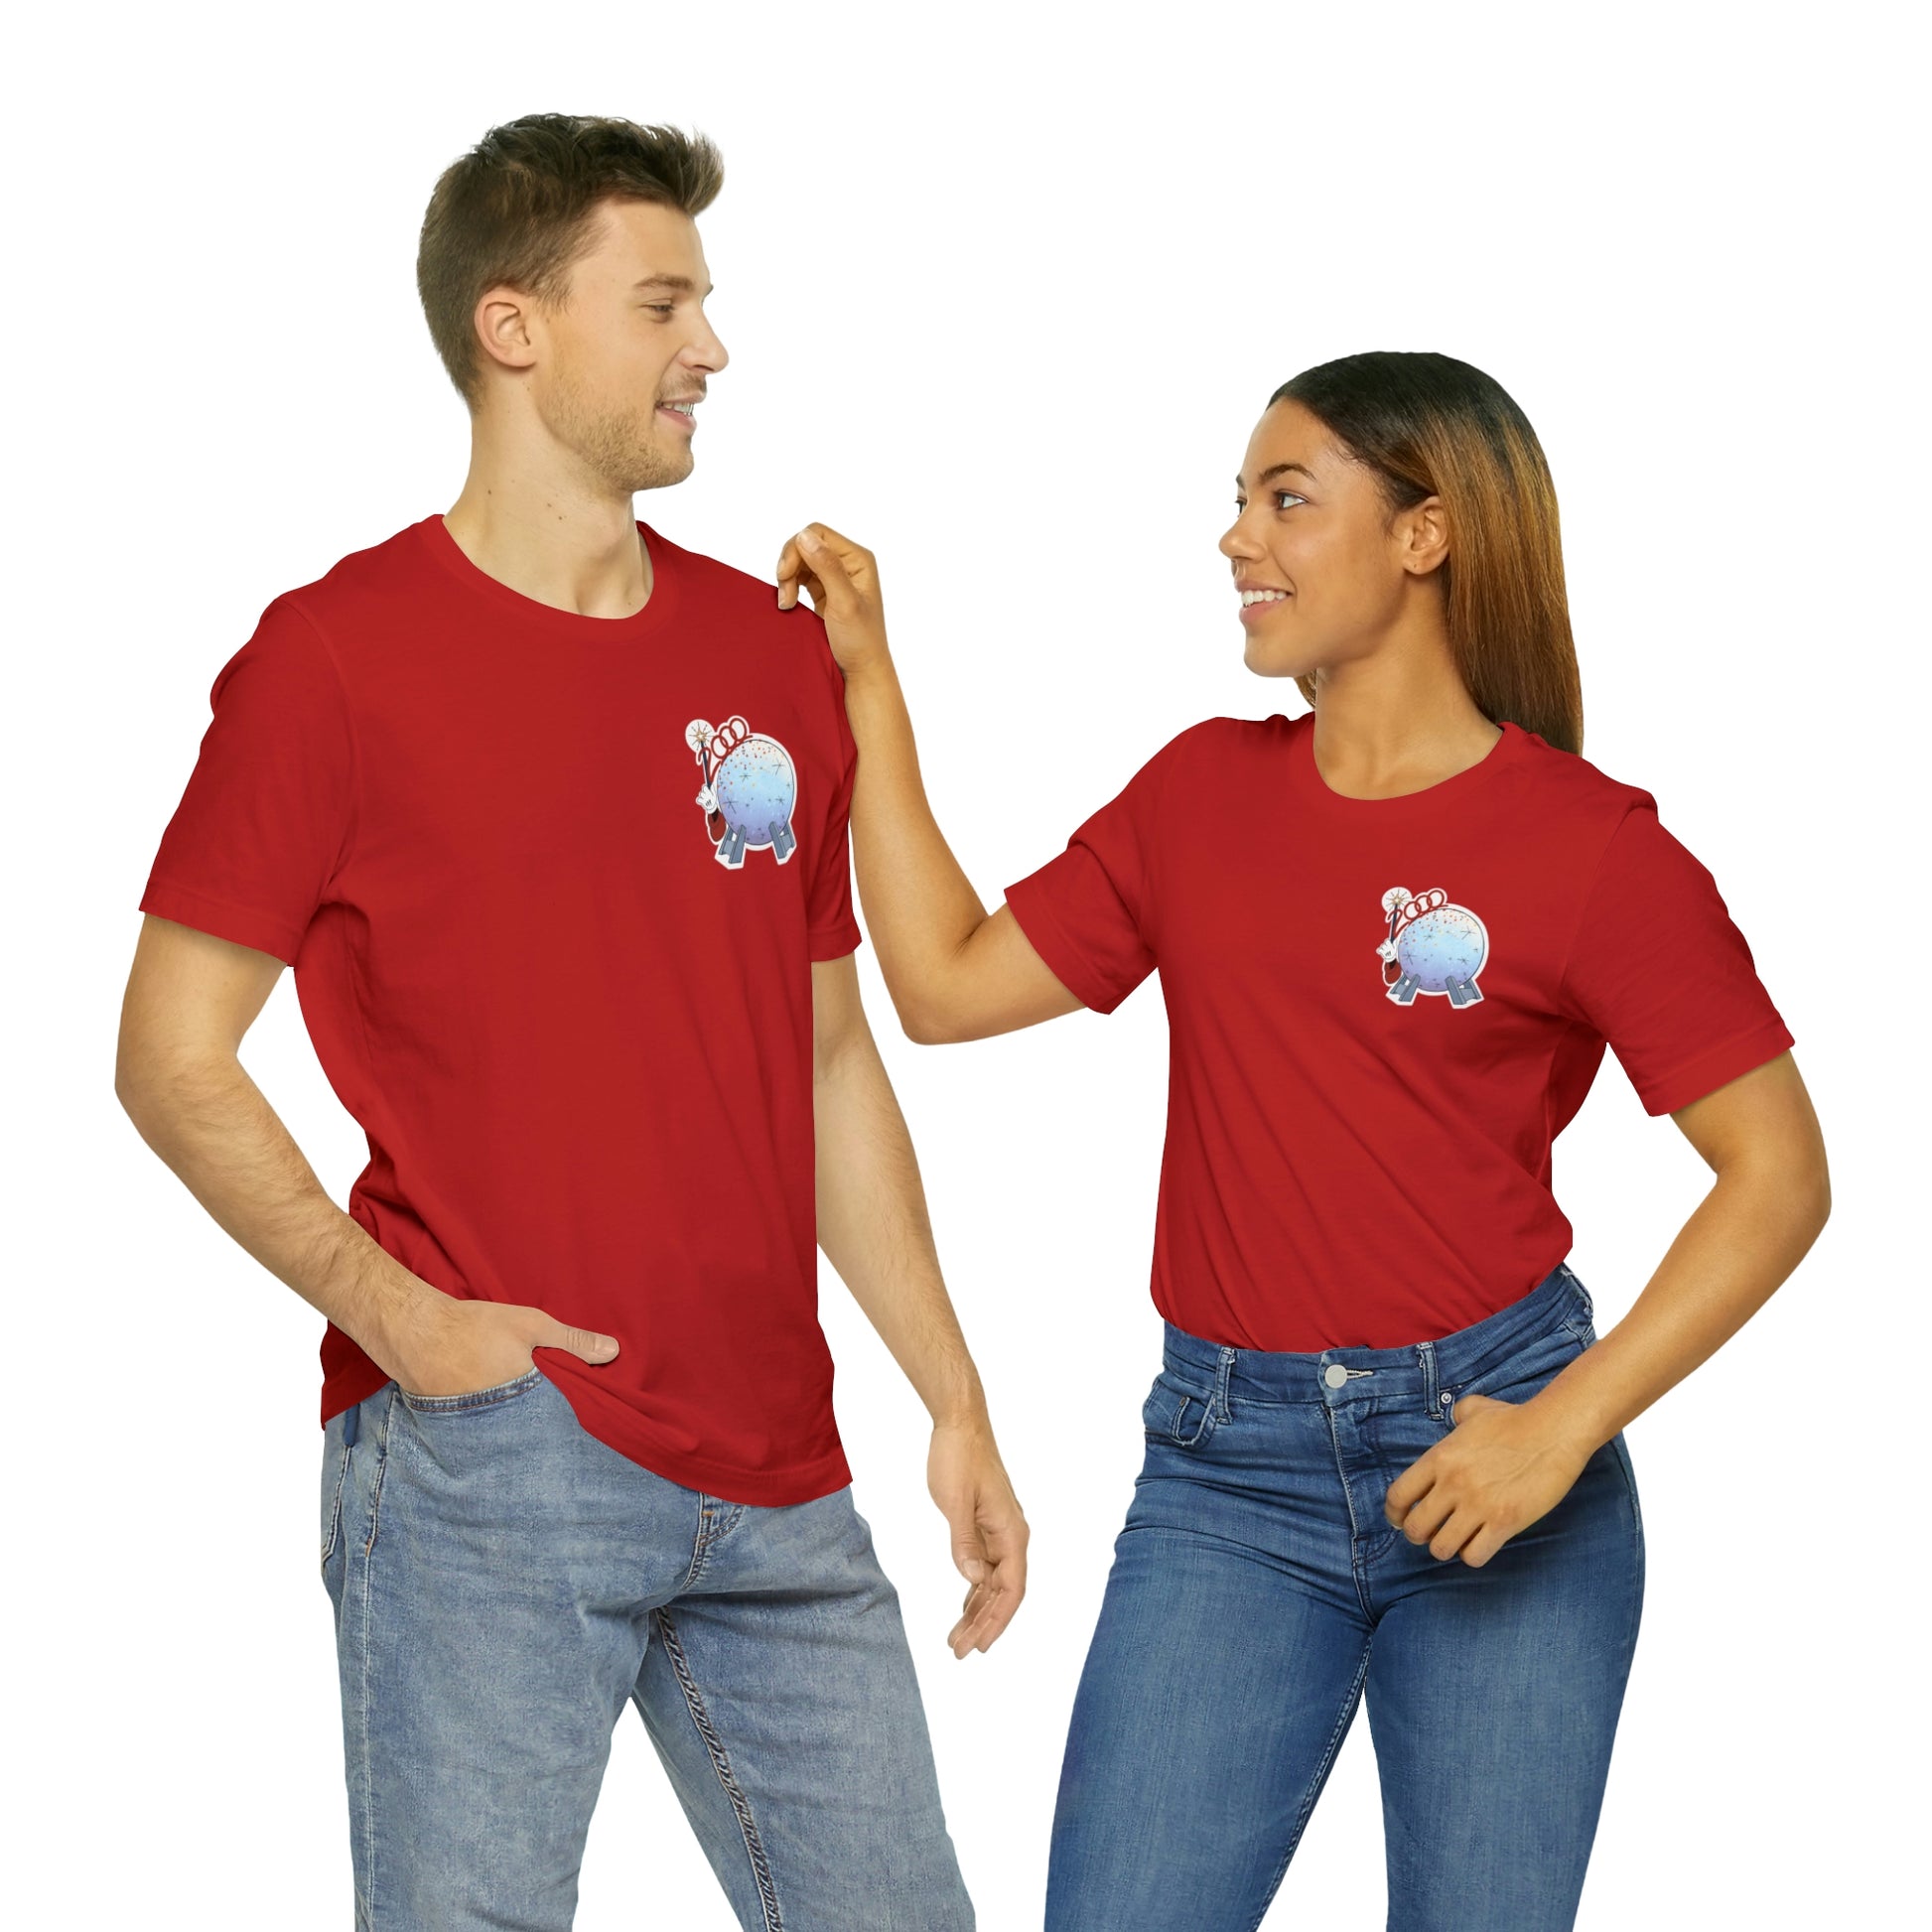 Red Millennium Celebration tee mens and Womens